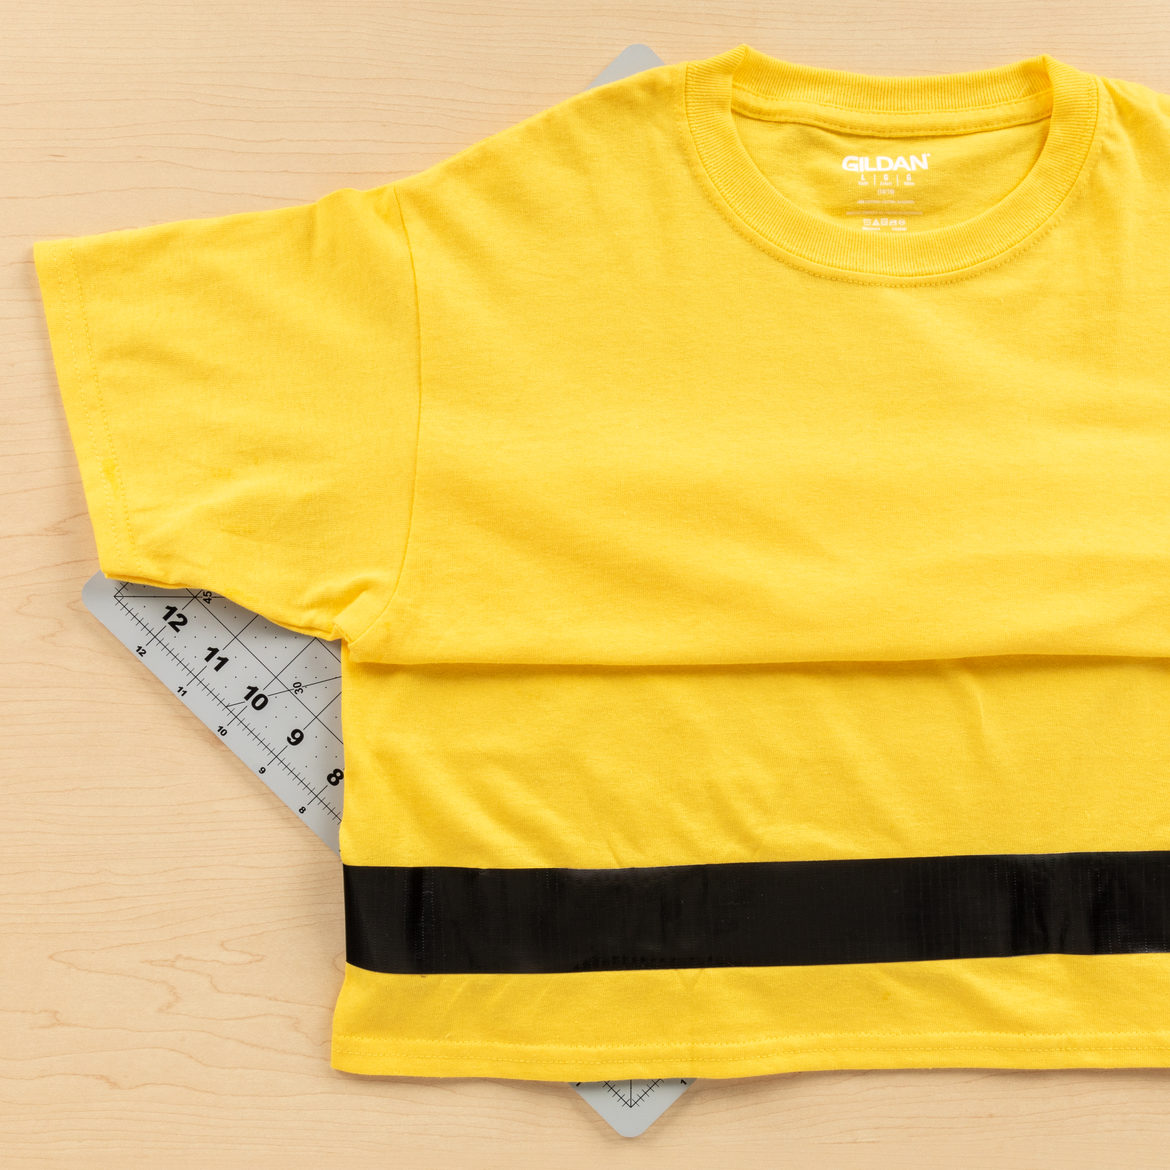 strips form the previous step attached to a yellow T-shirt